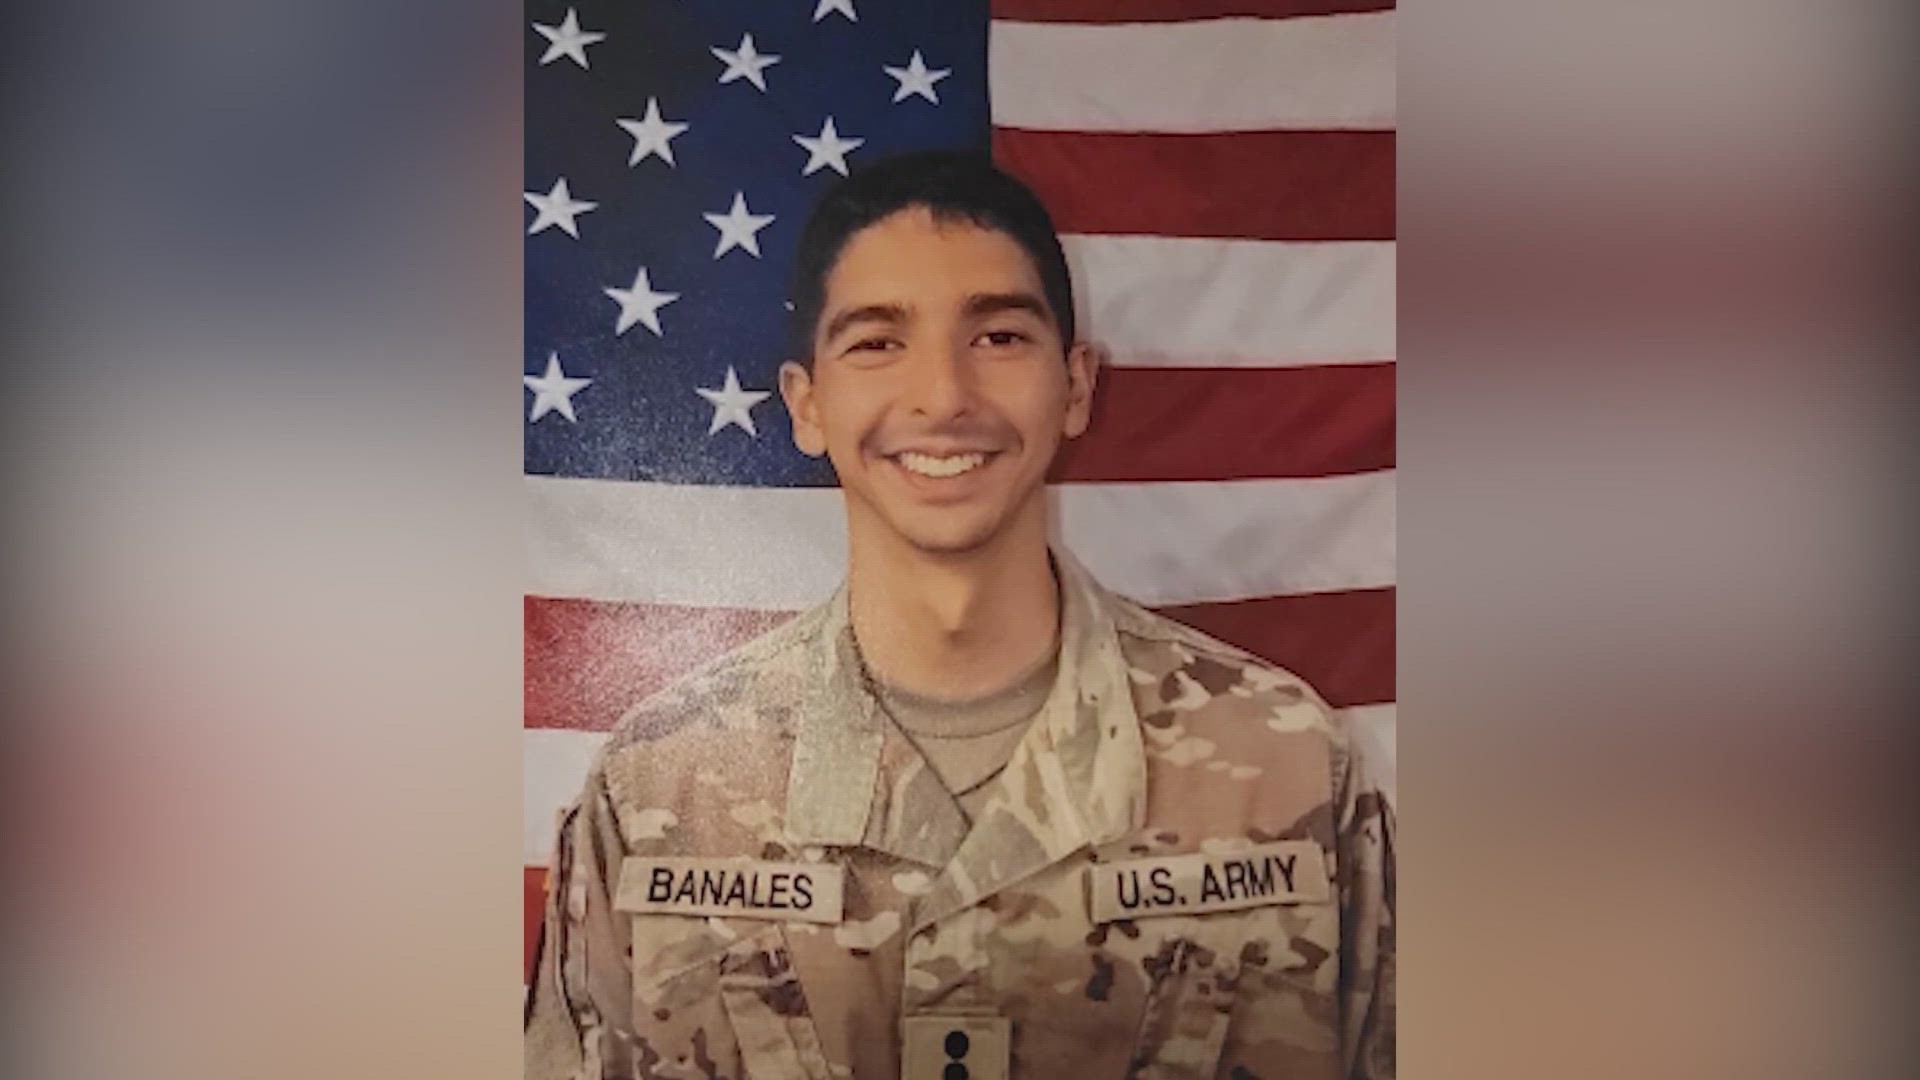 UIW honors murdered army cadet with posthumous degree